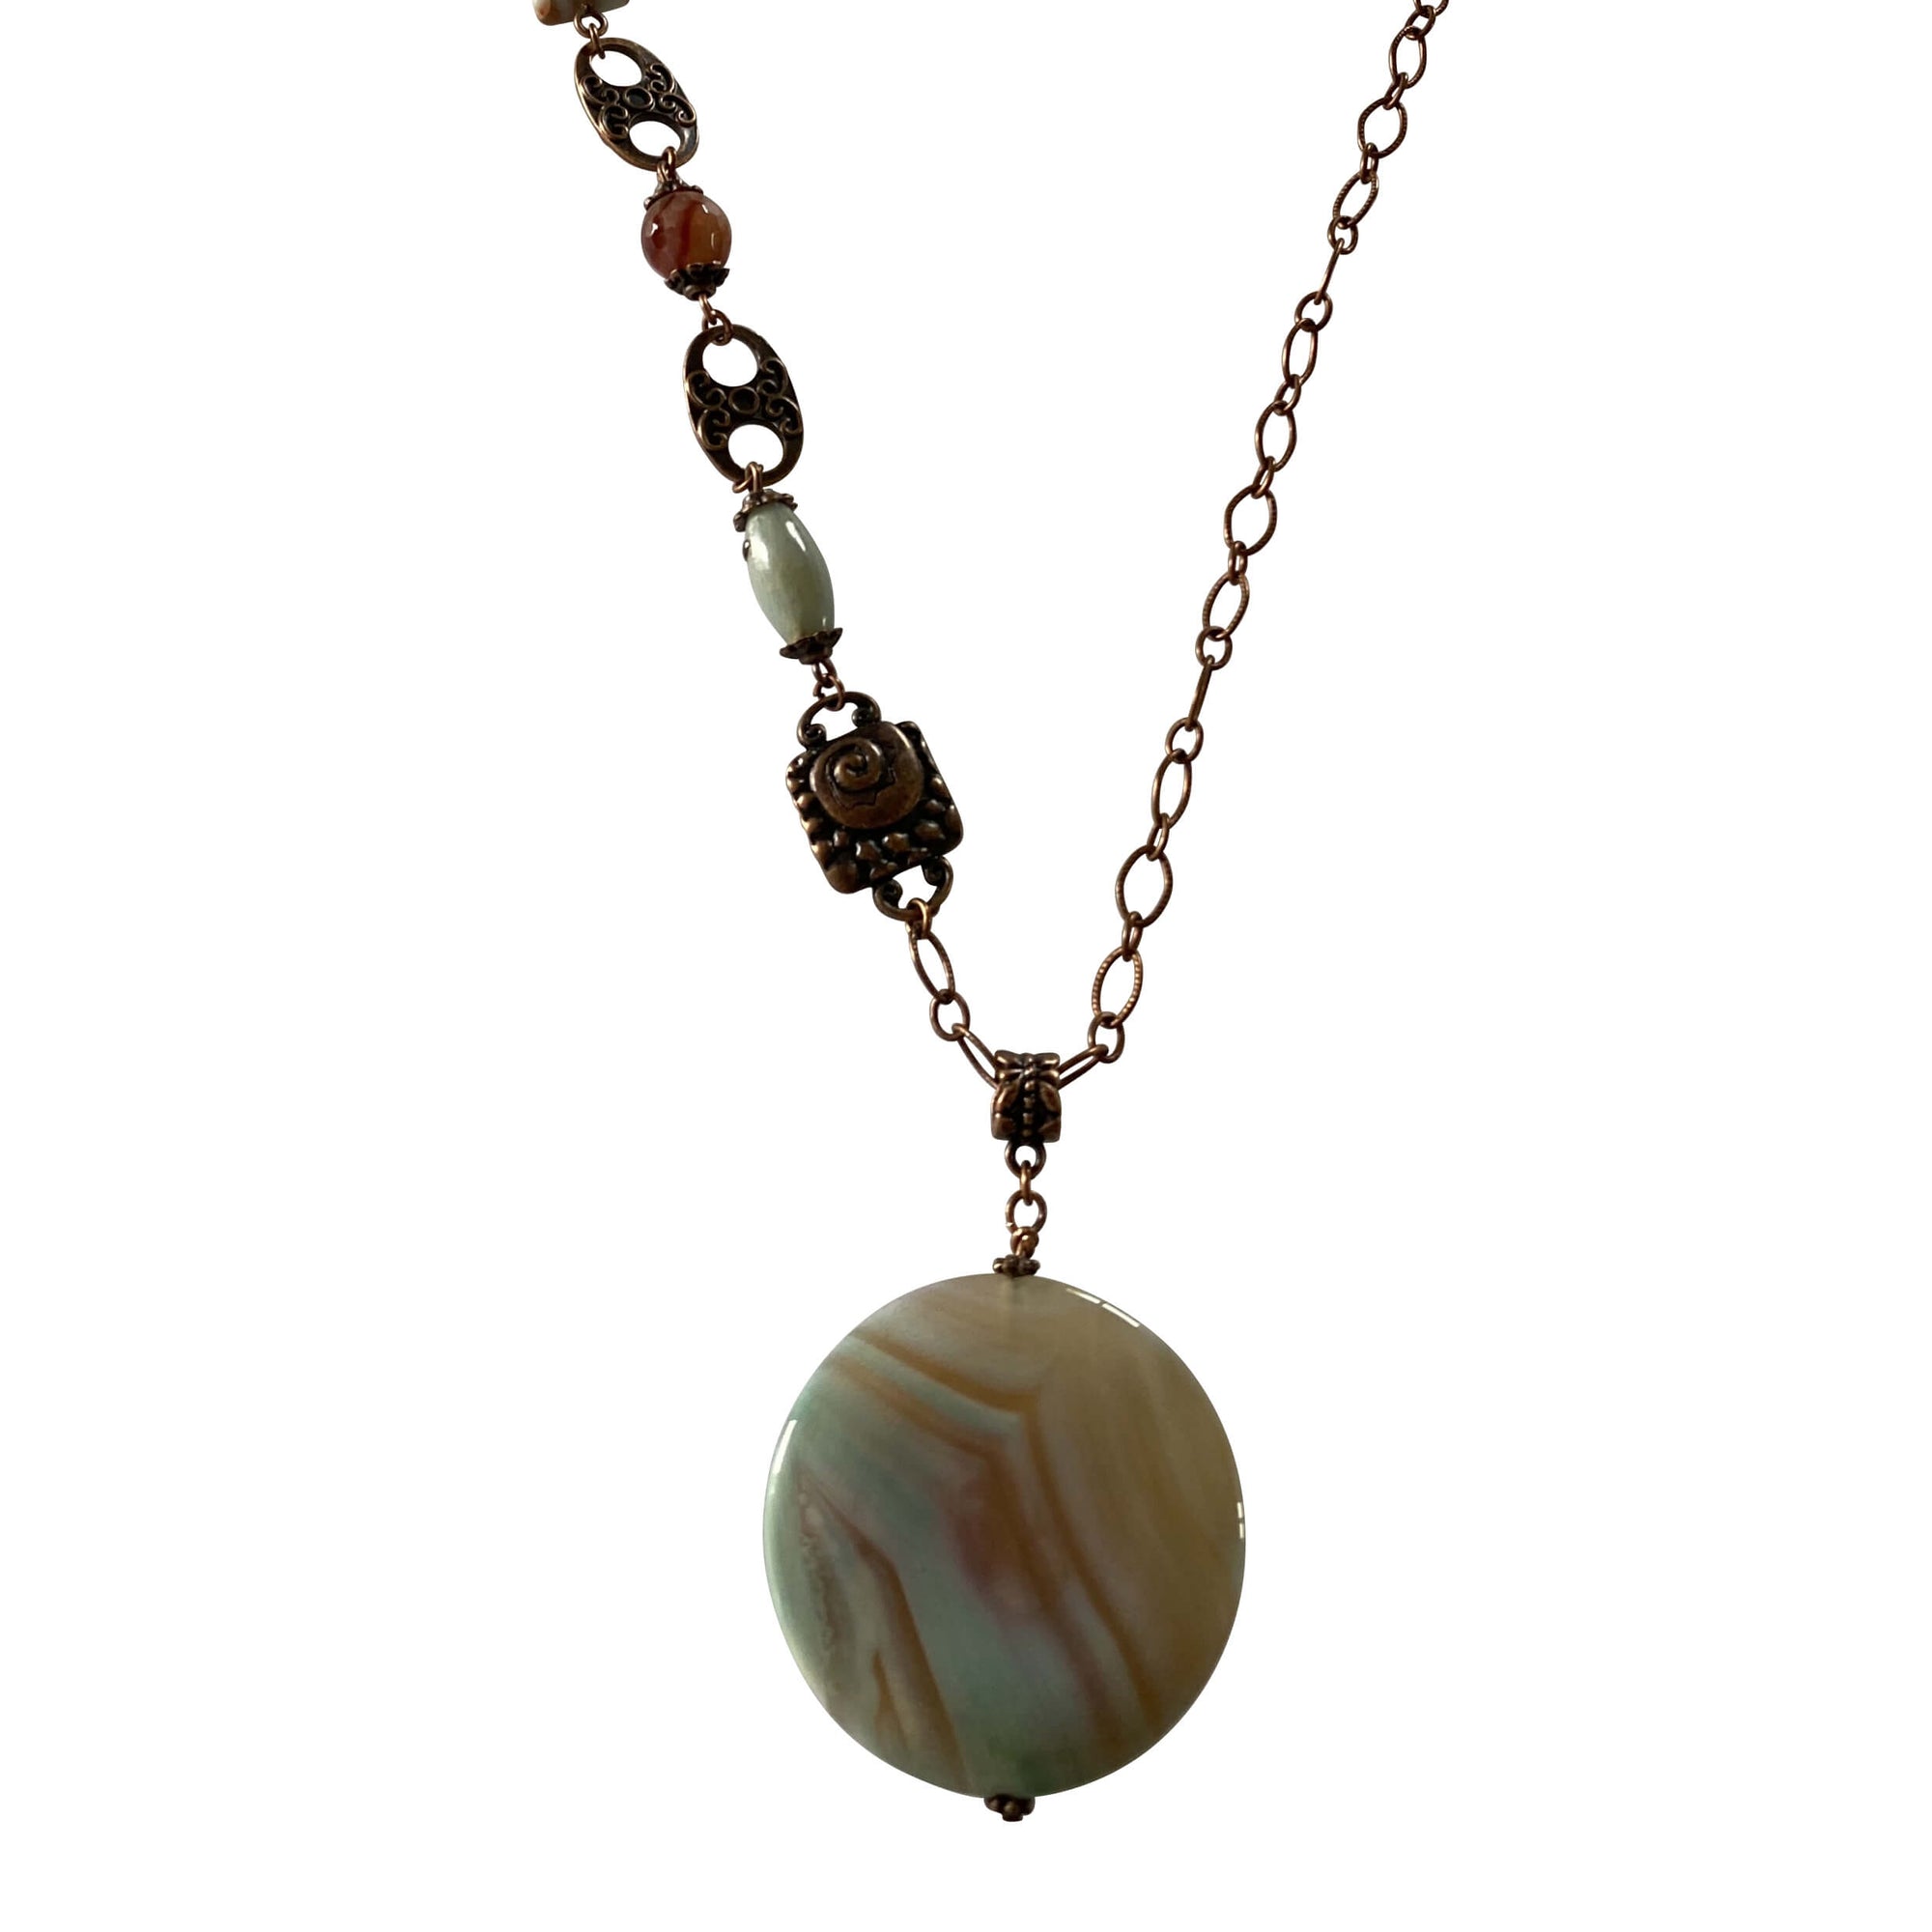 Jasper and Agate Necklace with Copper Chain-Necklaces- Creative Jewelry by Marcia